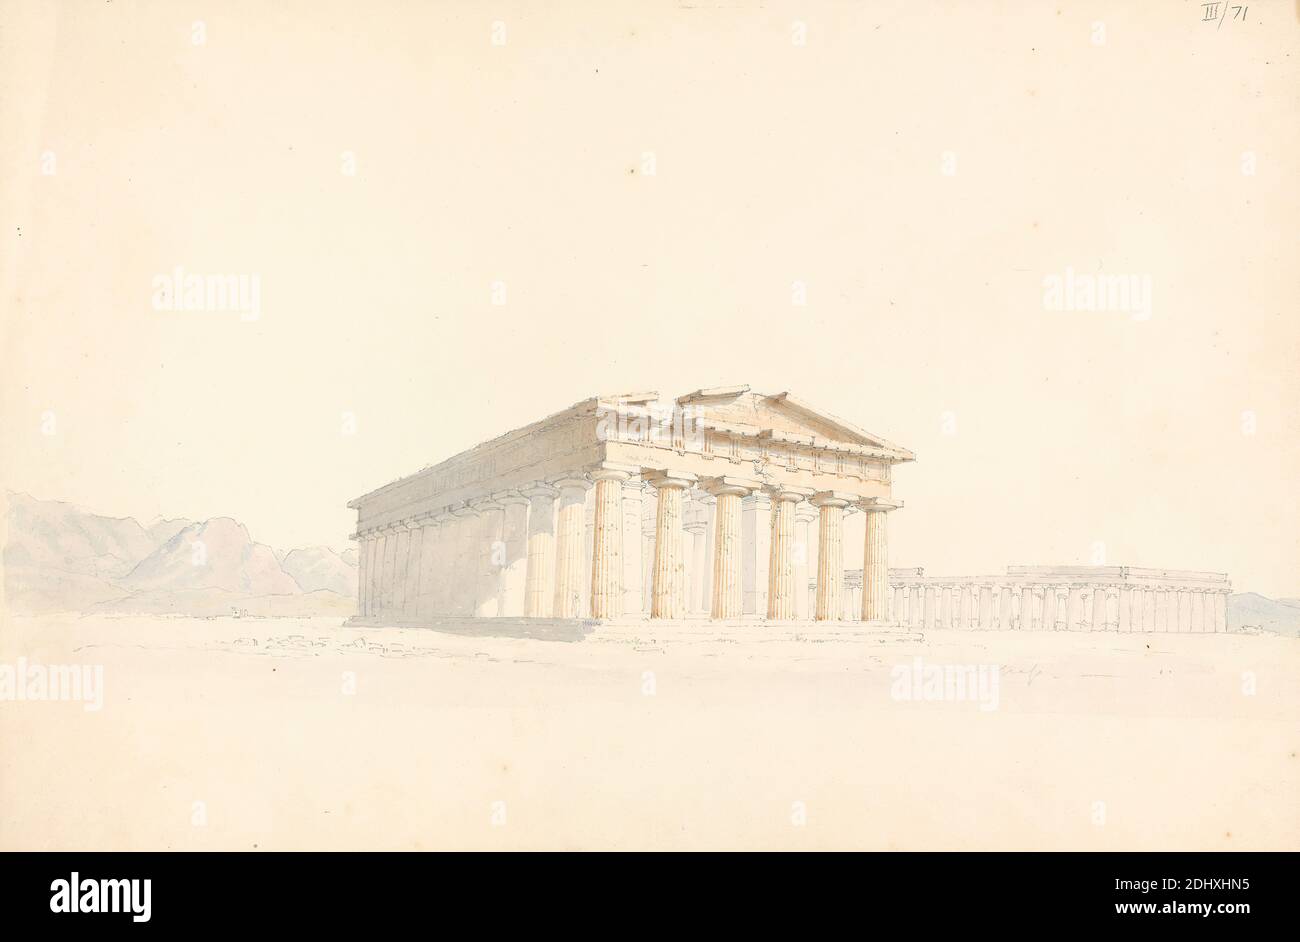 Second Temple of Hera, in the Foreground, First Temple of Hera in the Background, at Paestum, Sir Robert Smirke the younger, 1781–1867, British, 1802-1804, Watercolor, graphite, pen and brown ink on moderately thick, moderately textured, beige, wove paper, Sheet: 10 7/8 × 16 1/2 inches (27.6 × 41.9 cm Stock Photo